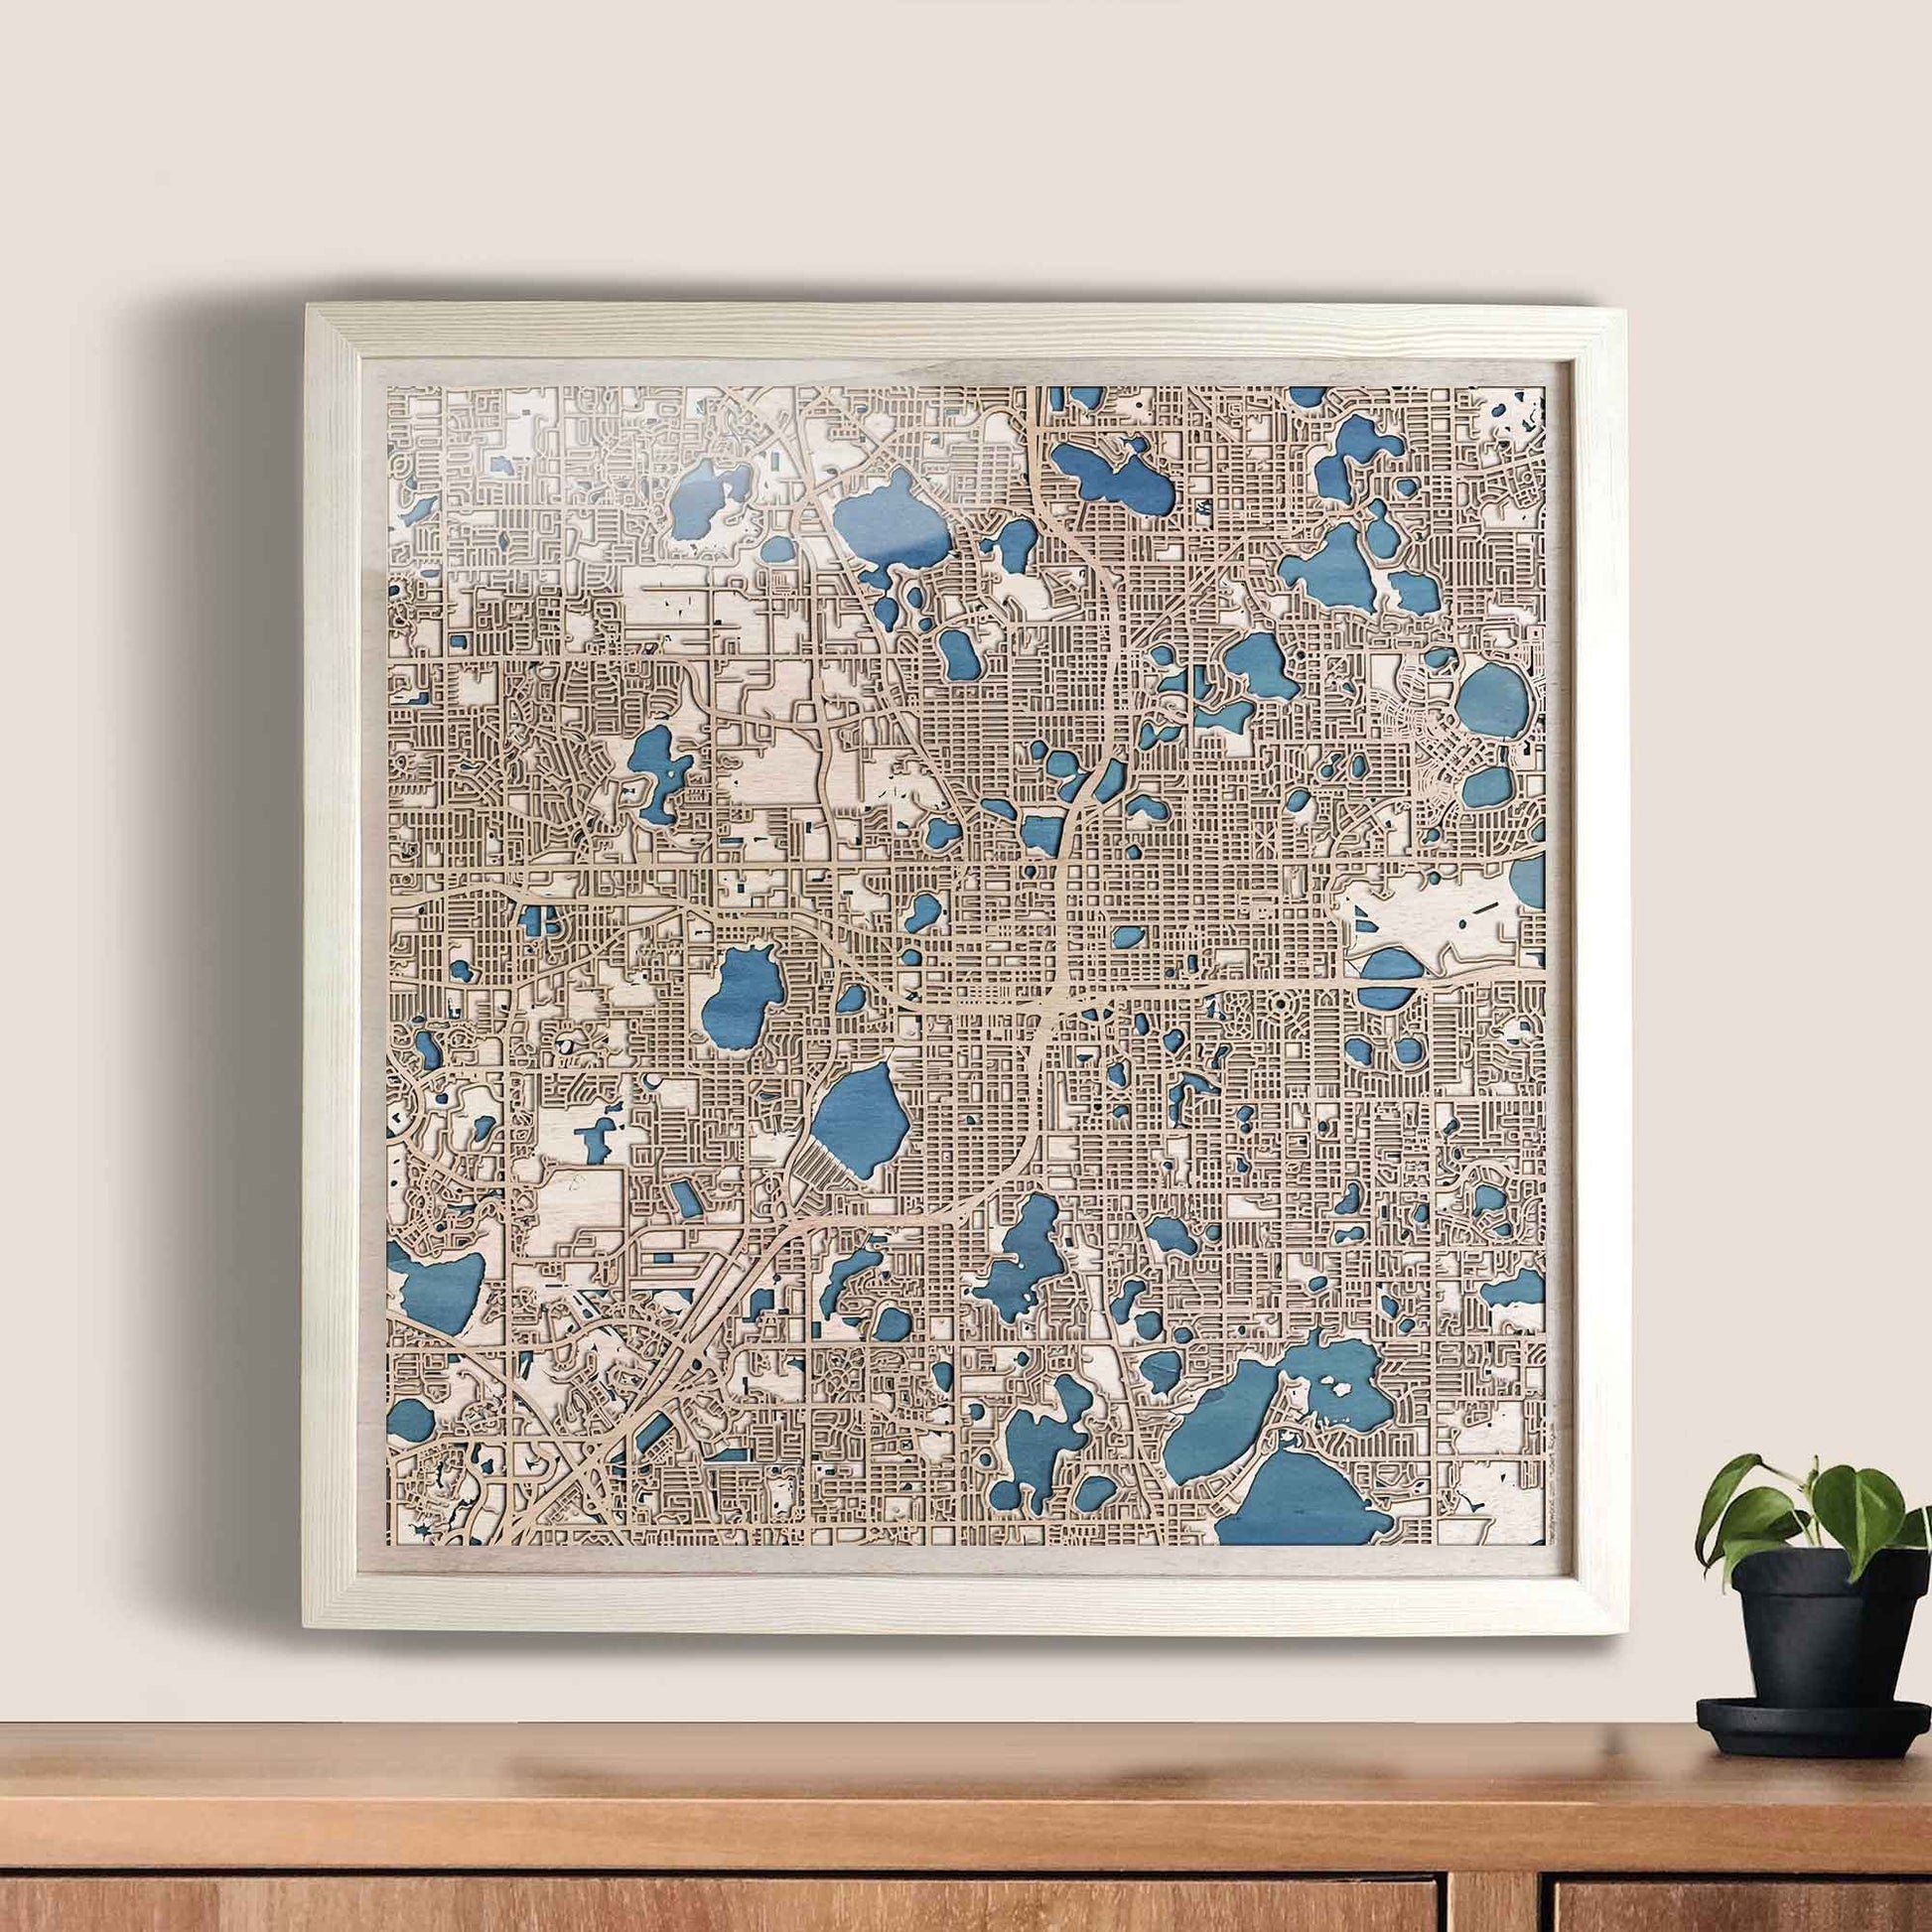 Orlando Wooden Map by CityWood - Custom Wood Map Art - Unique Laser Cut Engraved - Anniversary Gift